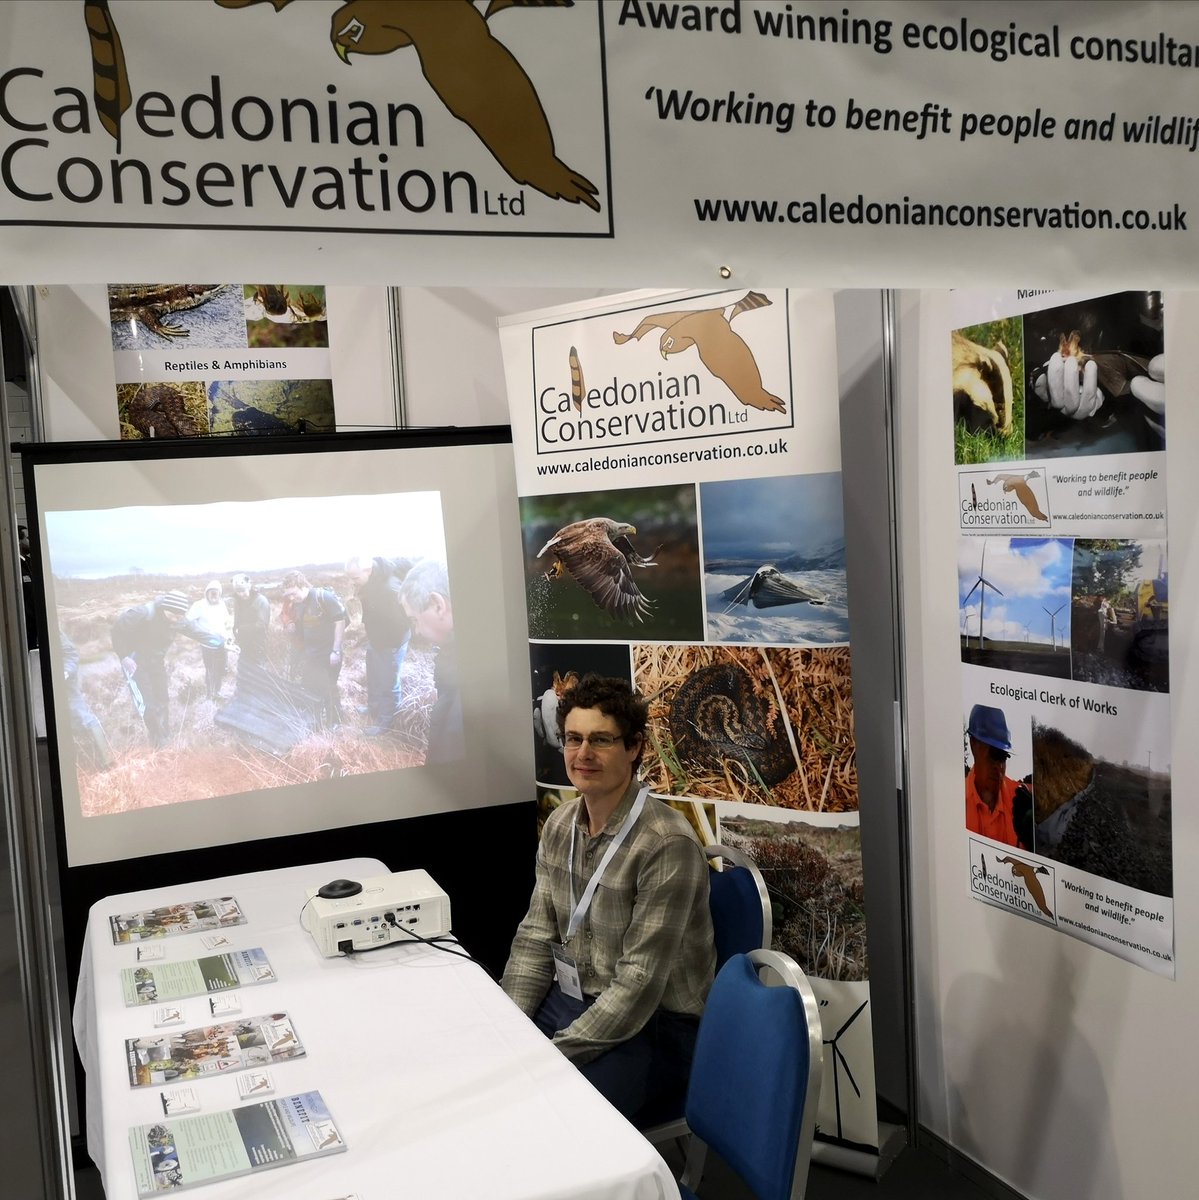 Come meet Director Chris Cathrine and Senior Ecologist Niall Currie at #ProcurexScotland today (stand 128a) @SECGlasgow! @CIEEMnet #ecology #wildlife